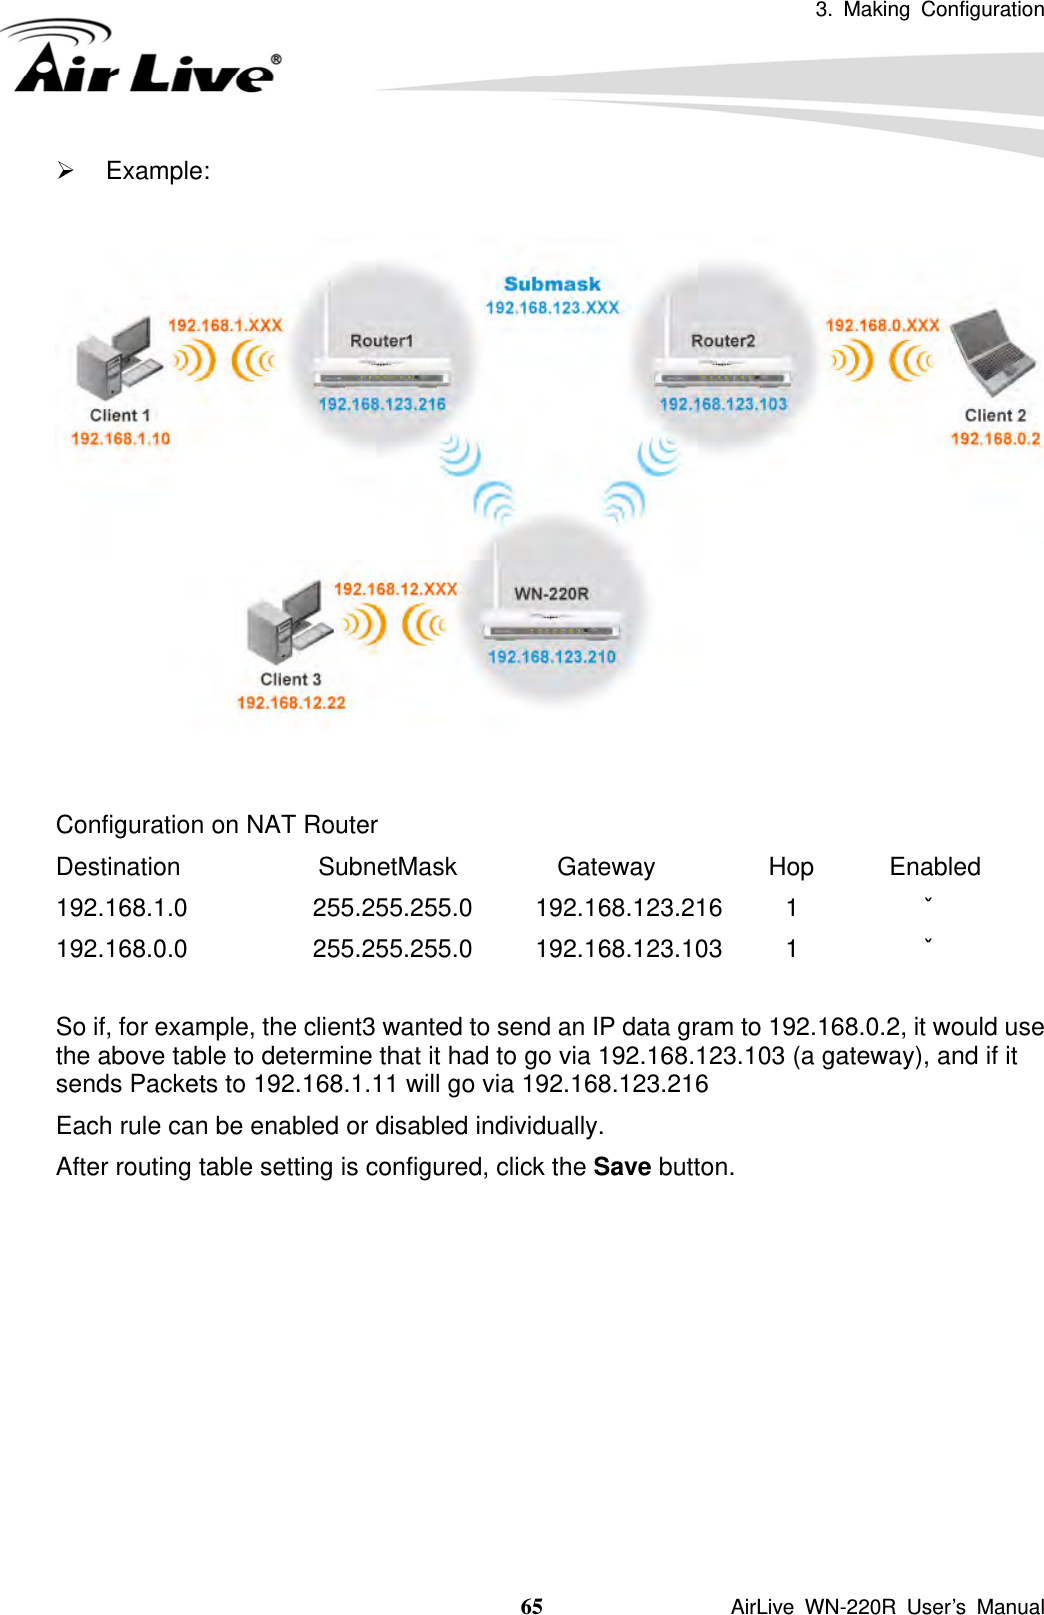 3. Making Configuration  65               AirLive WN-220R User’s Manual ¾ Example:     Configuration on NAT Router Destination           SubnetMask        Gateway         Hop      Enabled 192.168.1.0          255.255.255.0     192.168.123.216     1          ˇ 192.168.0.0          255.255.255.0     192.168.123.103     1          ˇ  So if, for example, the client3 wanted to send an IP data gram to 192.168.0.2, it would use the above table to determine that it had to go via 192.168.123.103 (a gateway), and if it sends Packets to 192.168.1.11 will go via 192.168.123.216 Each rule can be enabled or disabled individually. After routing table setting is configured, click the Save button. 